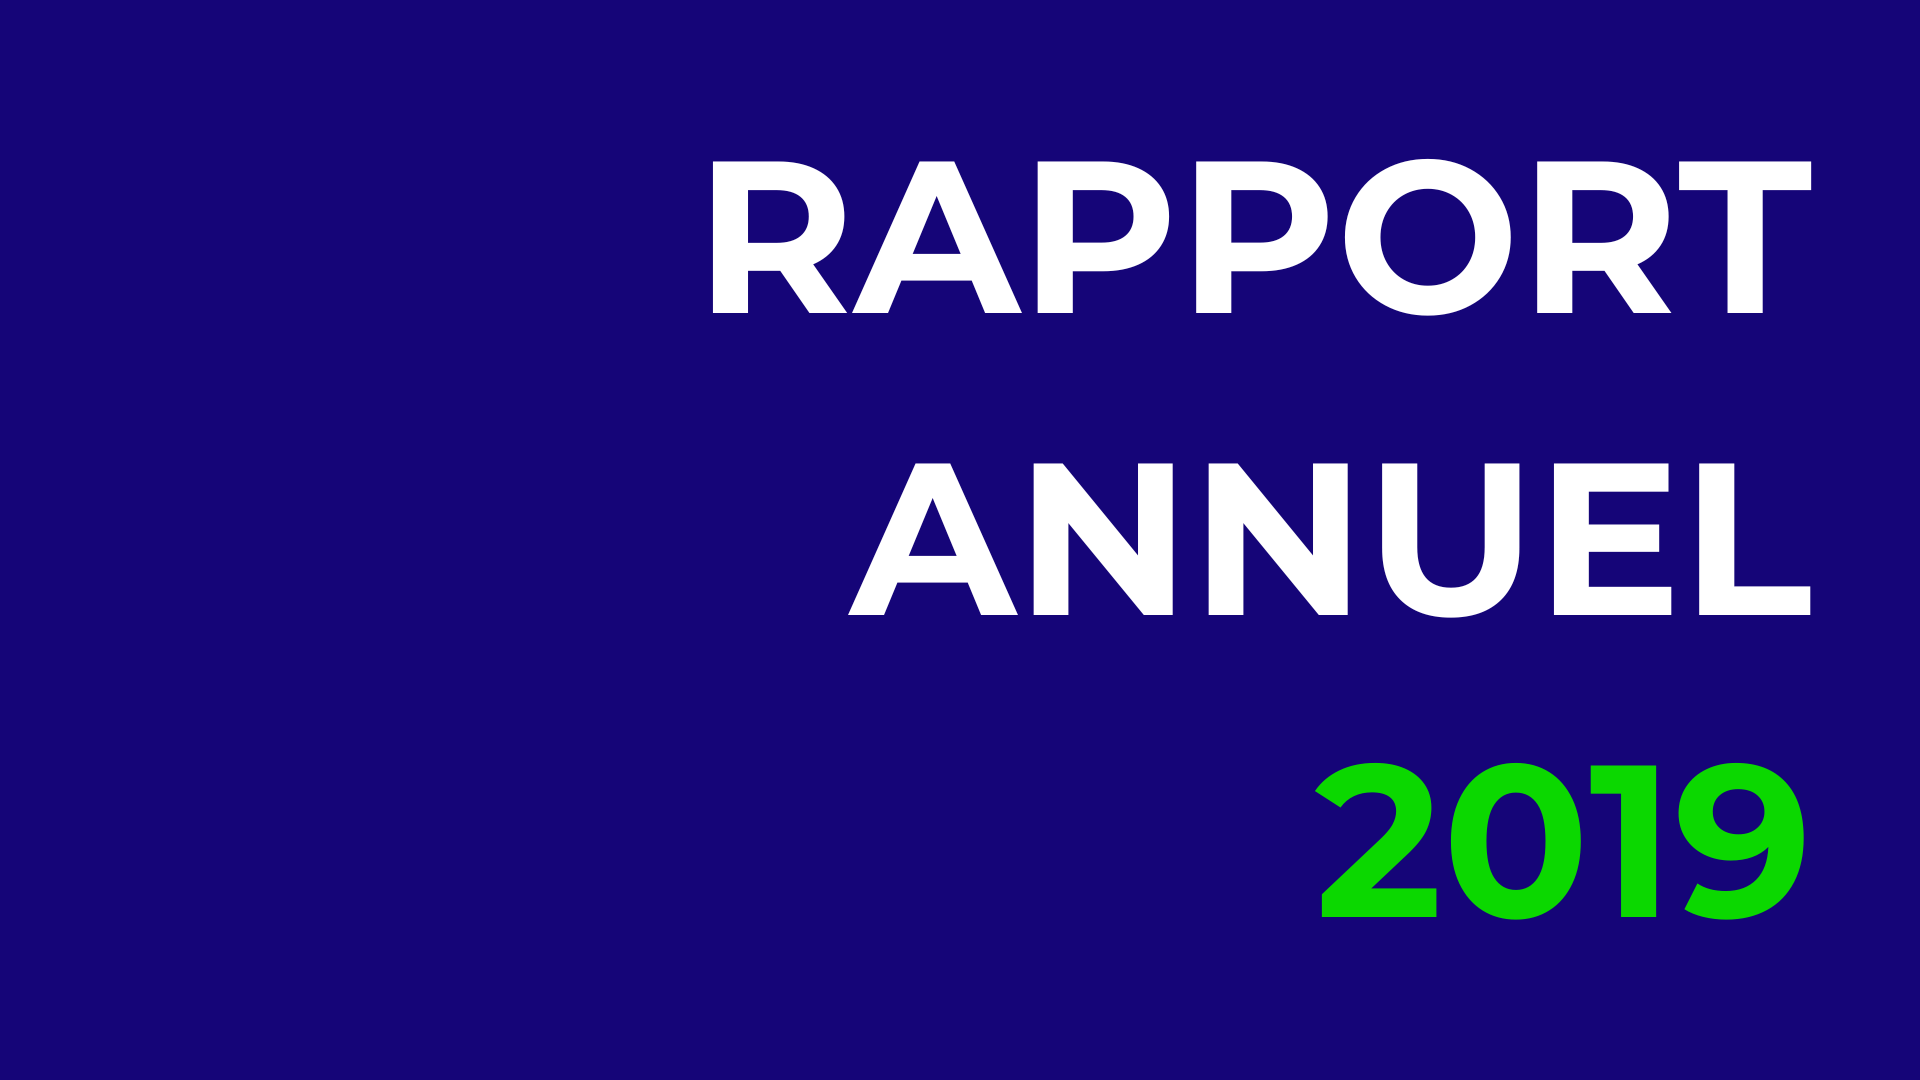 You are currently viewing Rapport annuel 2019 du SIAO 67‎ ‎ ‎ ‎ ‎ ‎ ‎ ‎ ‎ ‎ ‎ ‎ ‎ ‎ ‎ ‎ ‎ ‎ ‎ ‎ ‎ ‎ ‎ ‎ ‎ ‎